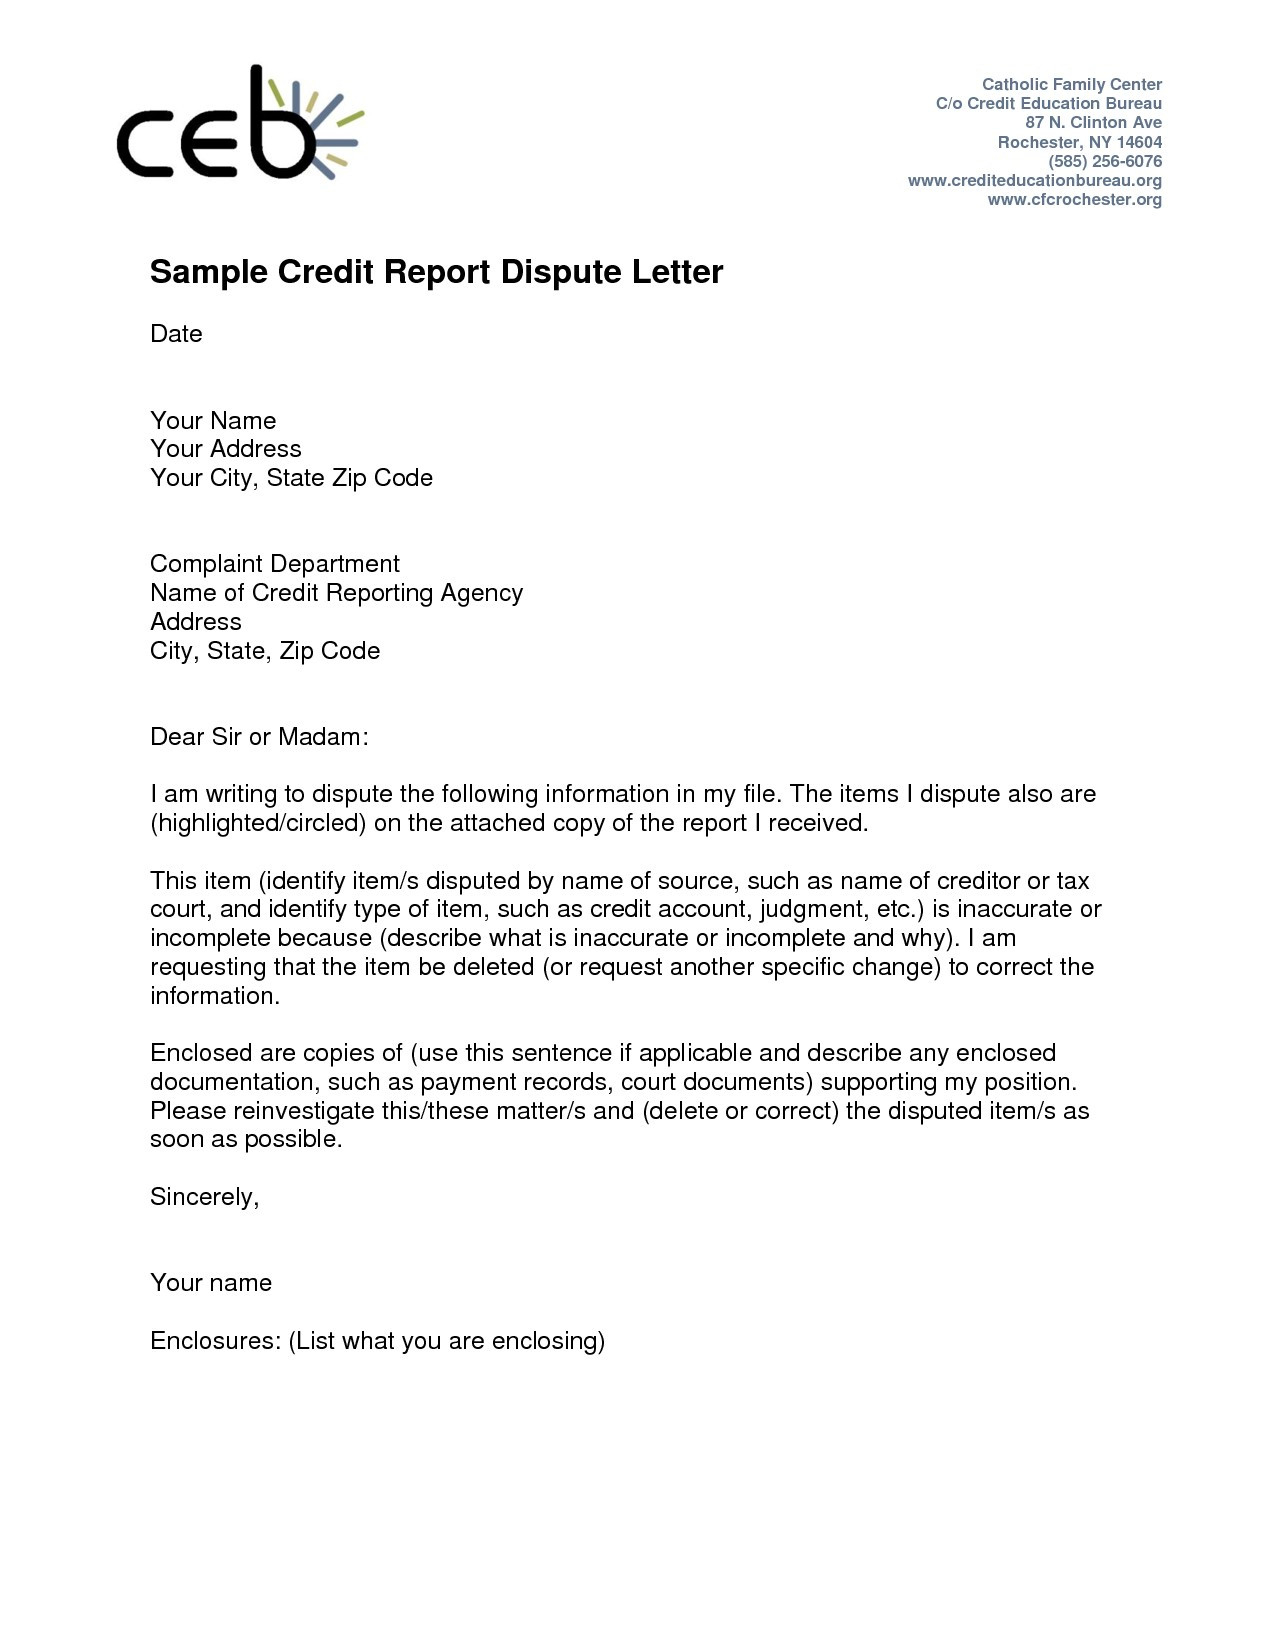 goodwill-letter-template-to-remove-paid-collections-collection-letter